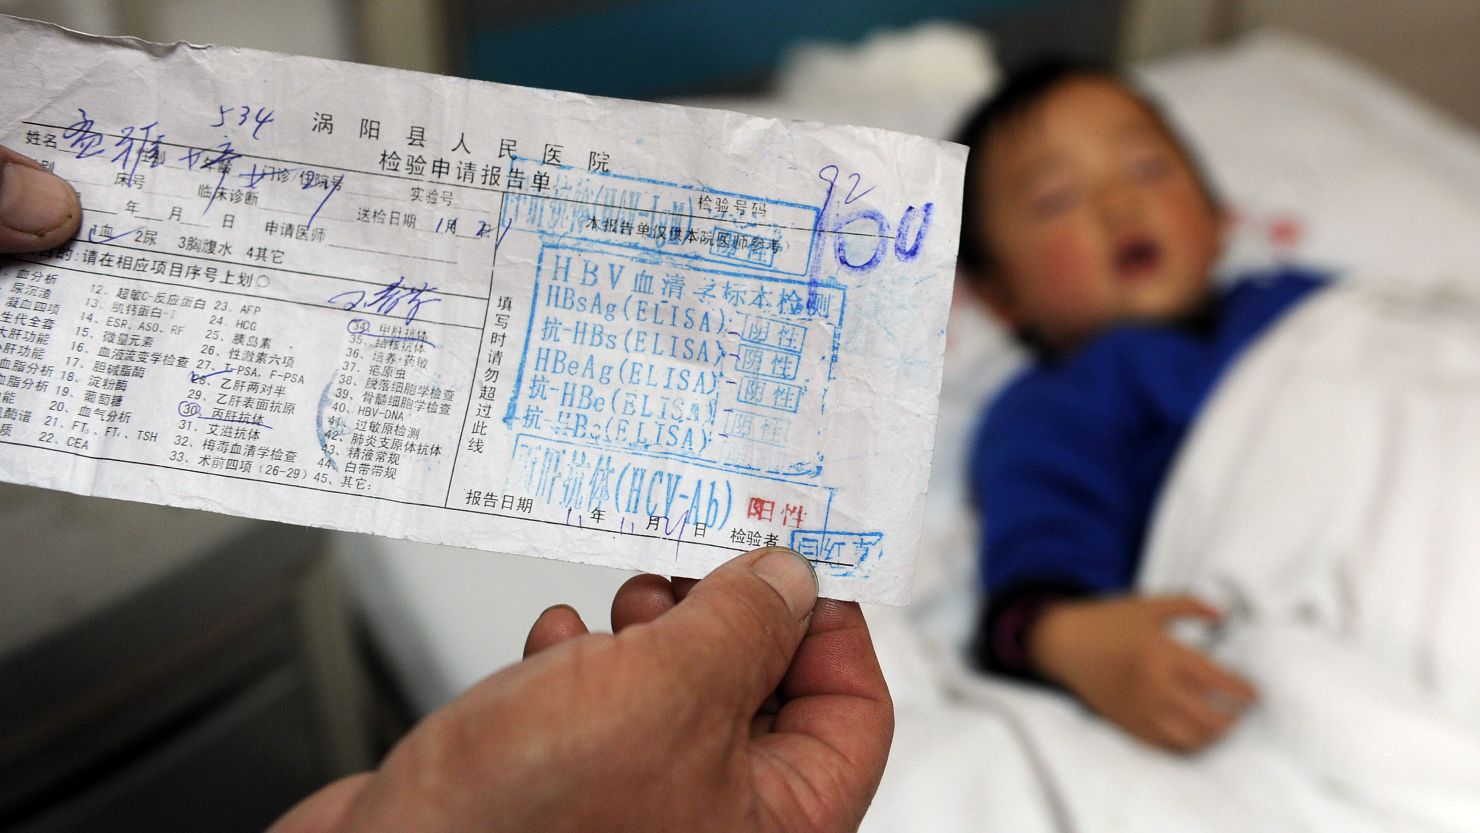 In this picture taken on November 28, 2011, a Chinese parent shows a test result slip confirming his child has hepatitis C, at a hospital in Hefei, east China's Anhui province.